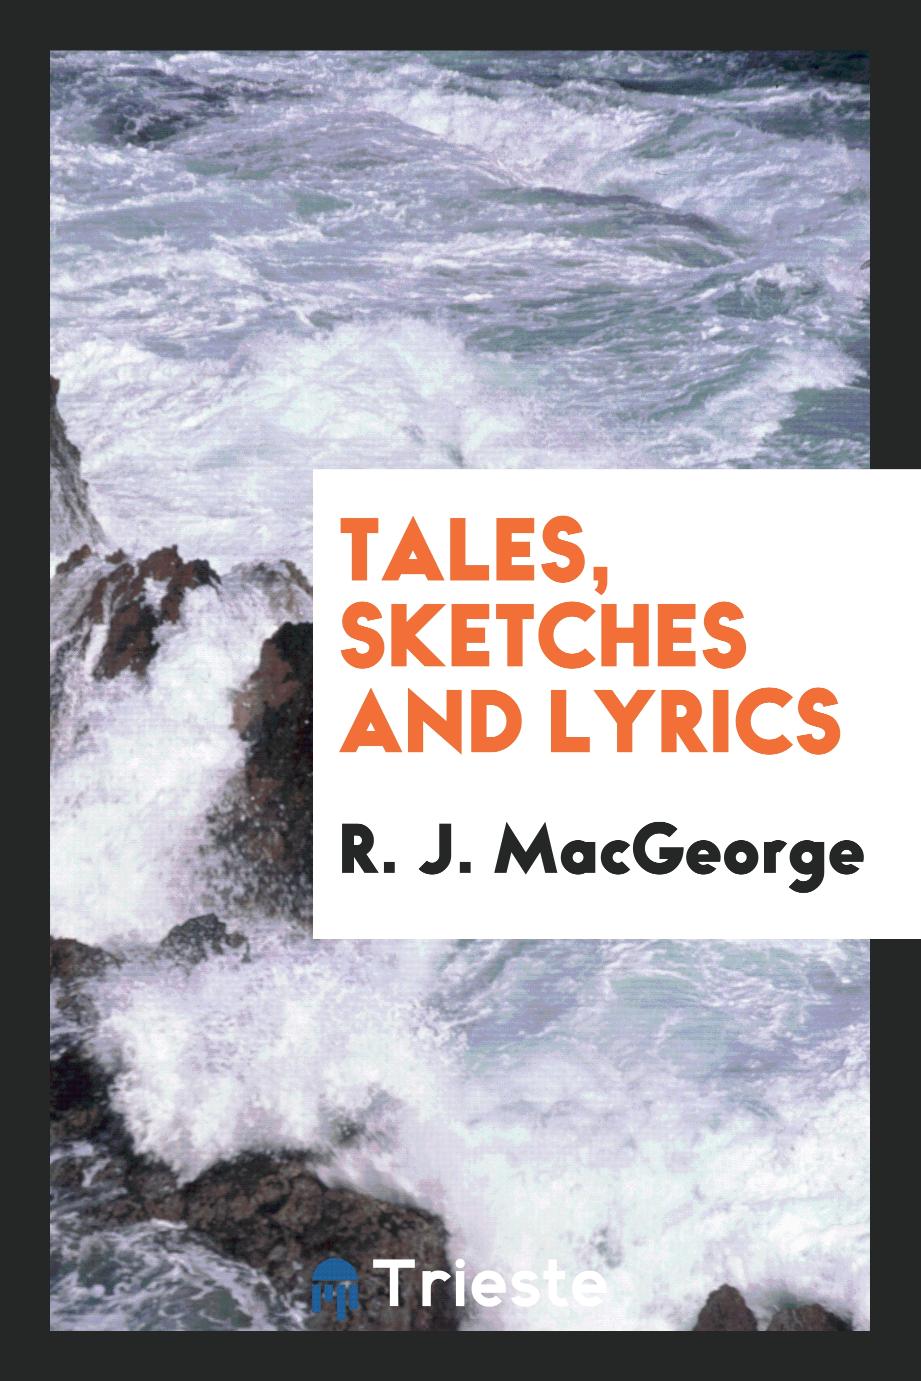 Tales, Sketches and Lyrics